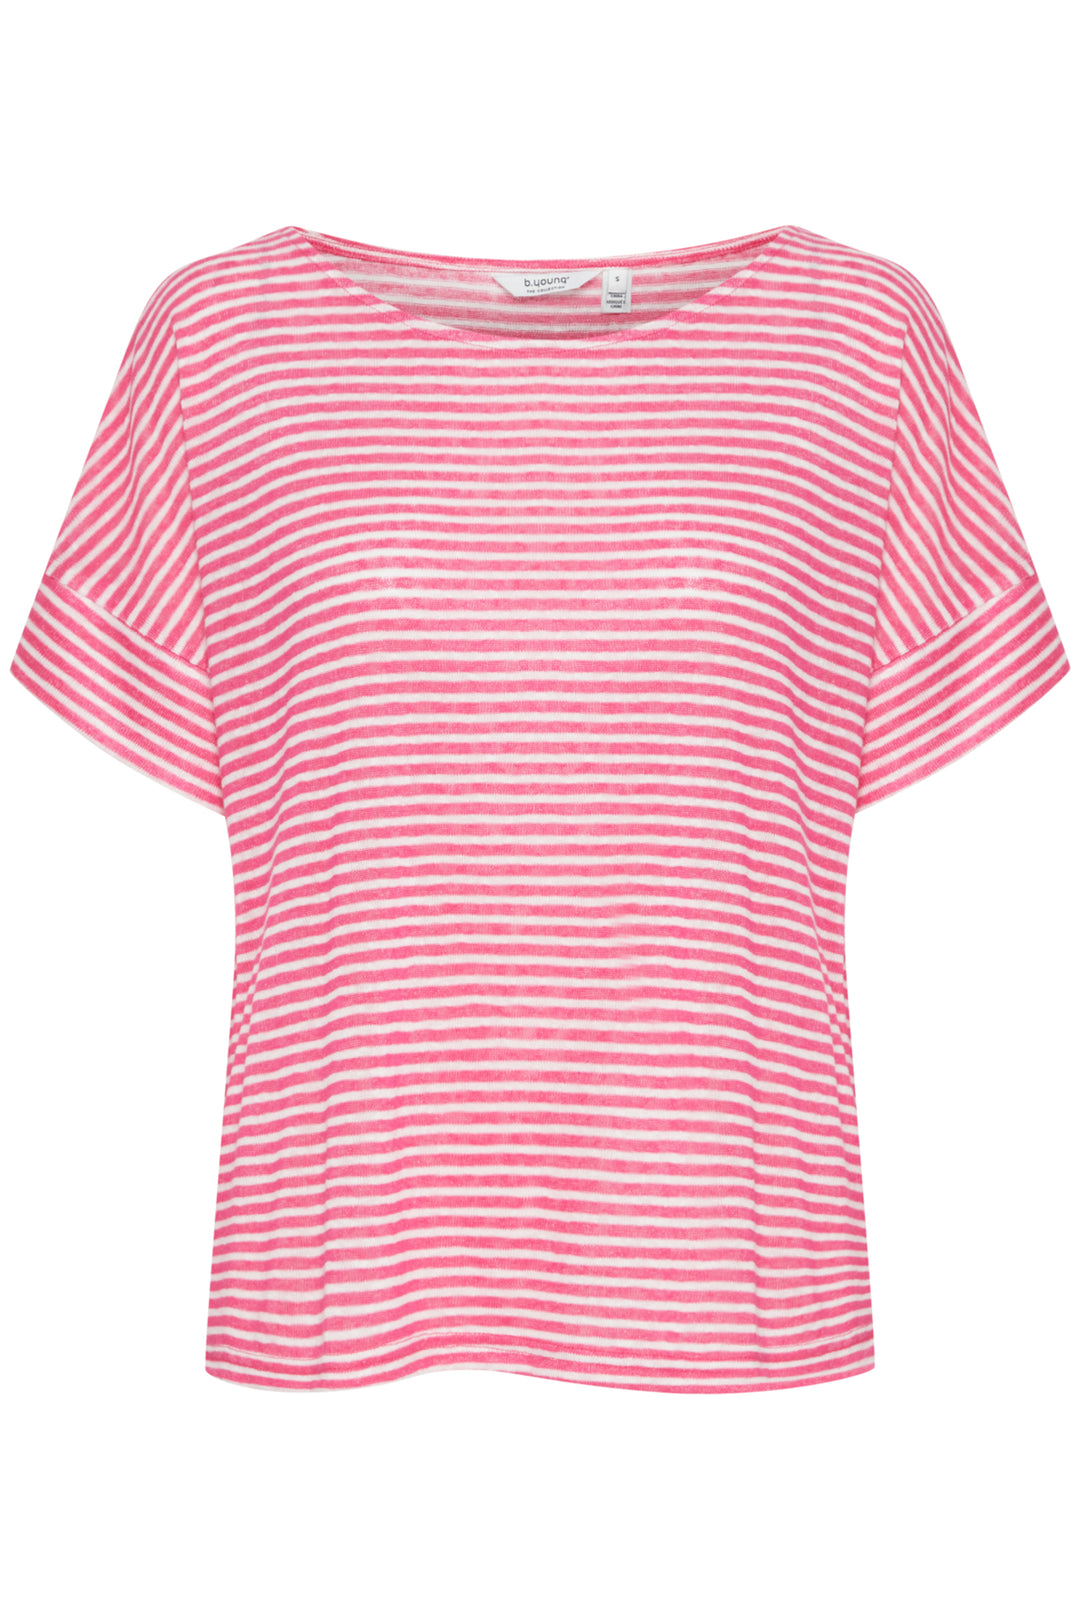 B. Young Summer 2024 Featuring a boat neck design, this top is made from a blend of cotton and other fabrics for a soft feel. The stripe pattern and contrast cuffs add a cute touch to this simple yet attractive piece.